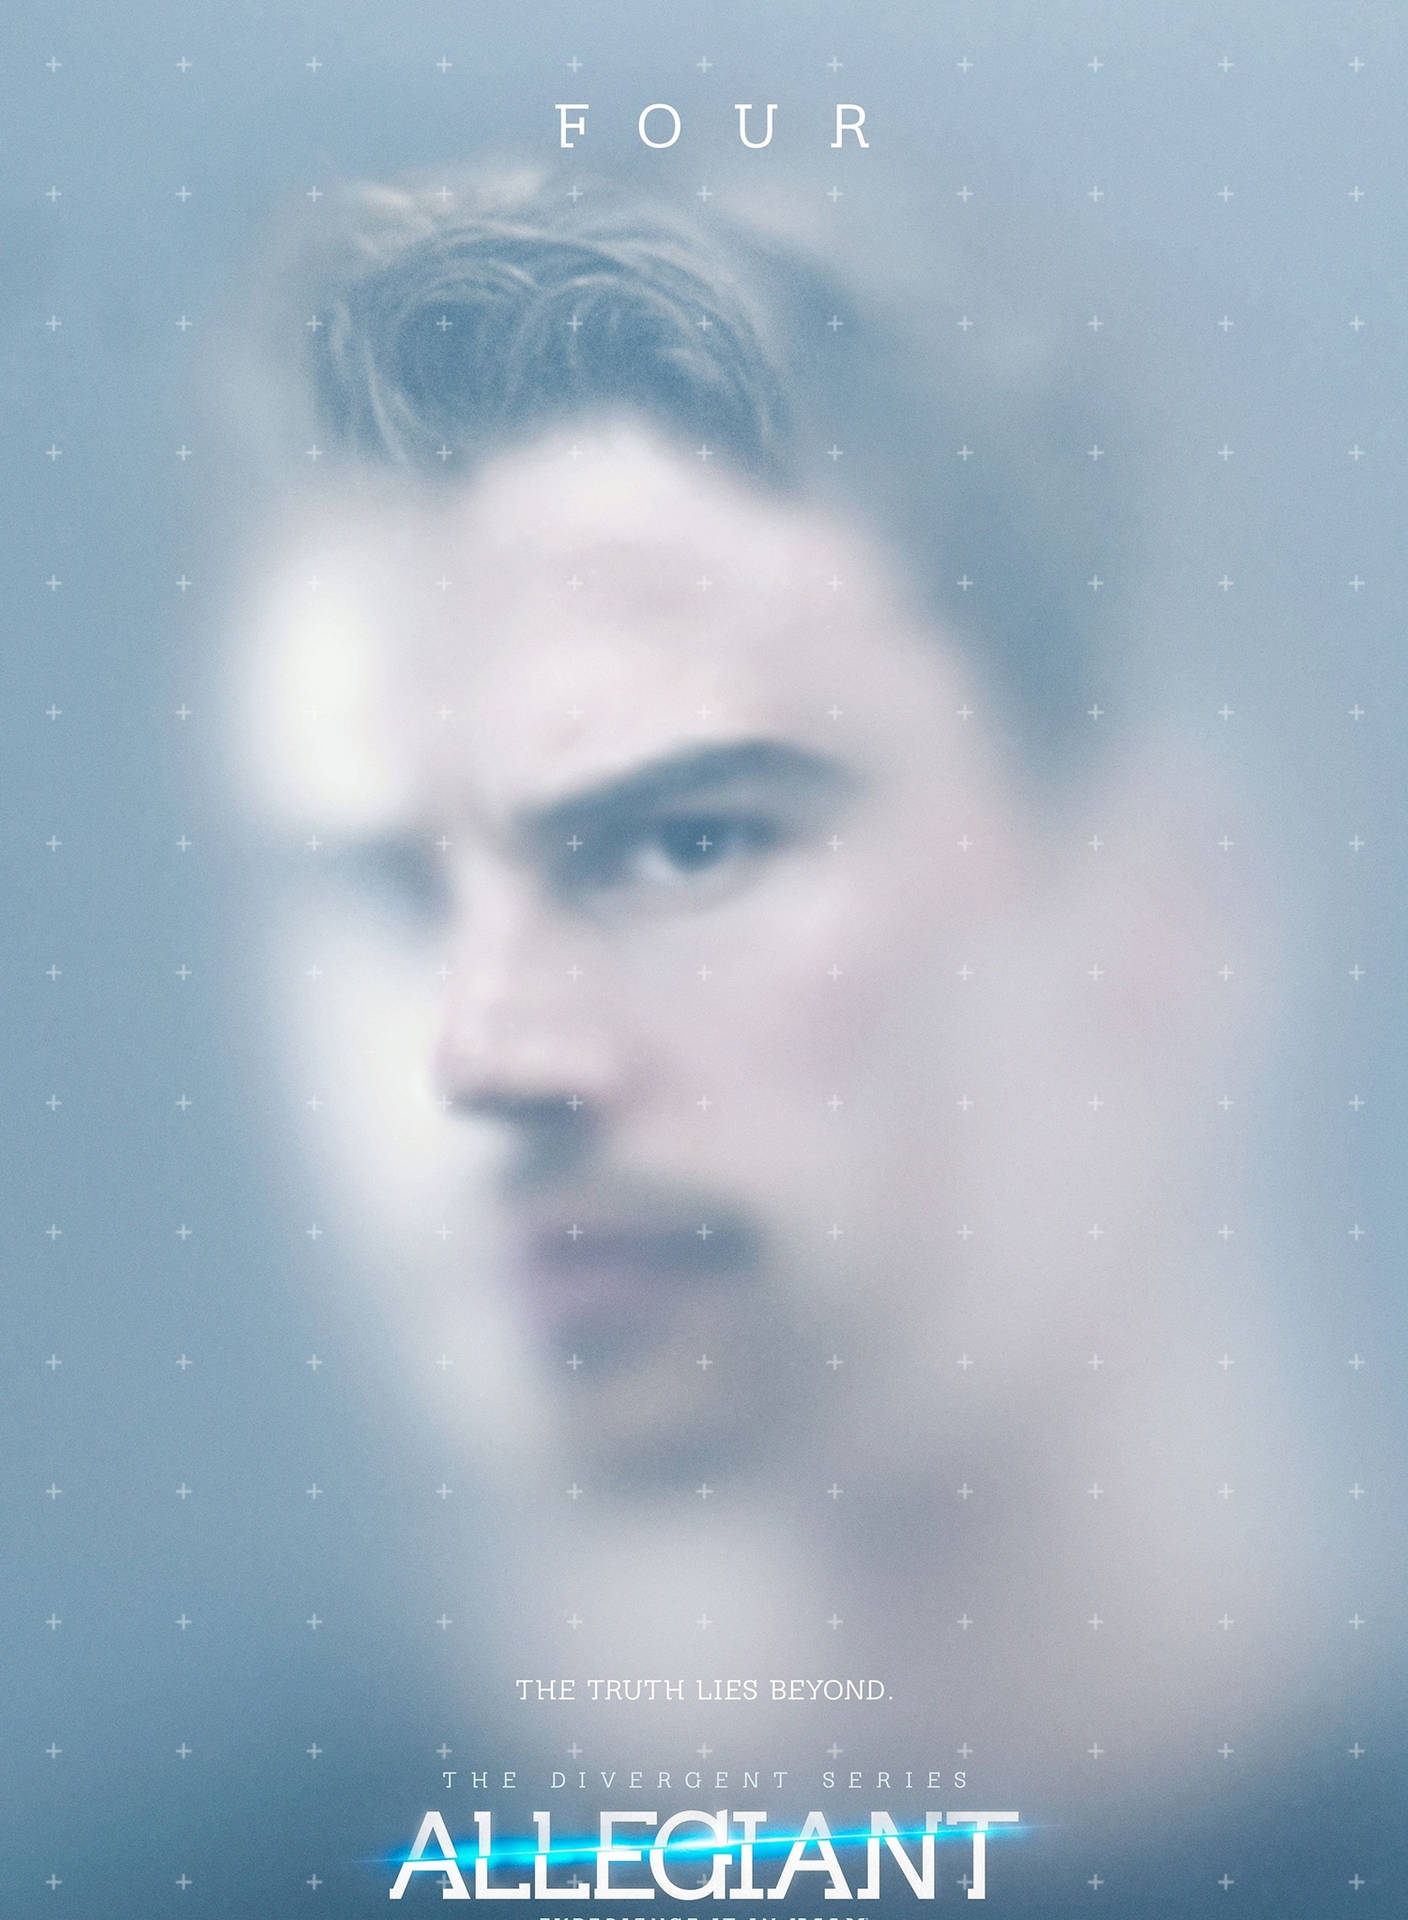 The Divergent Series Theo James  As Four Wallpaper